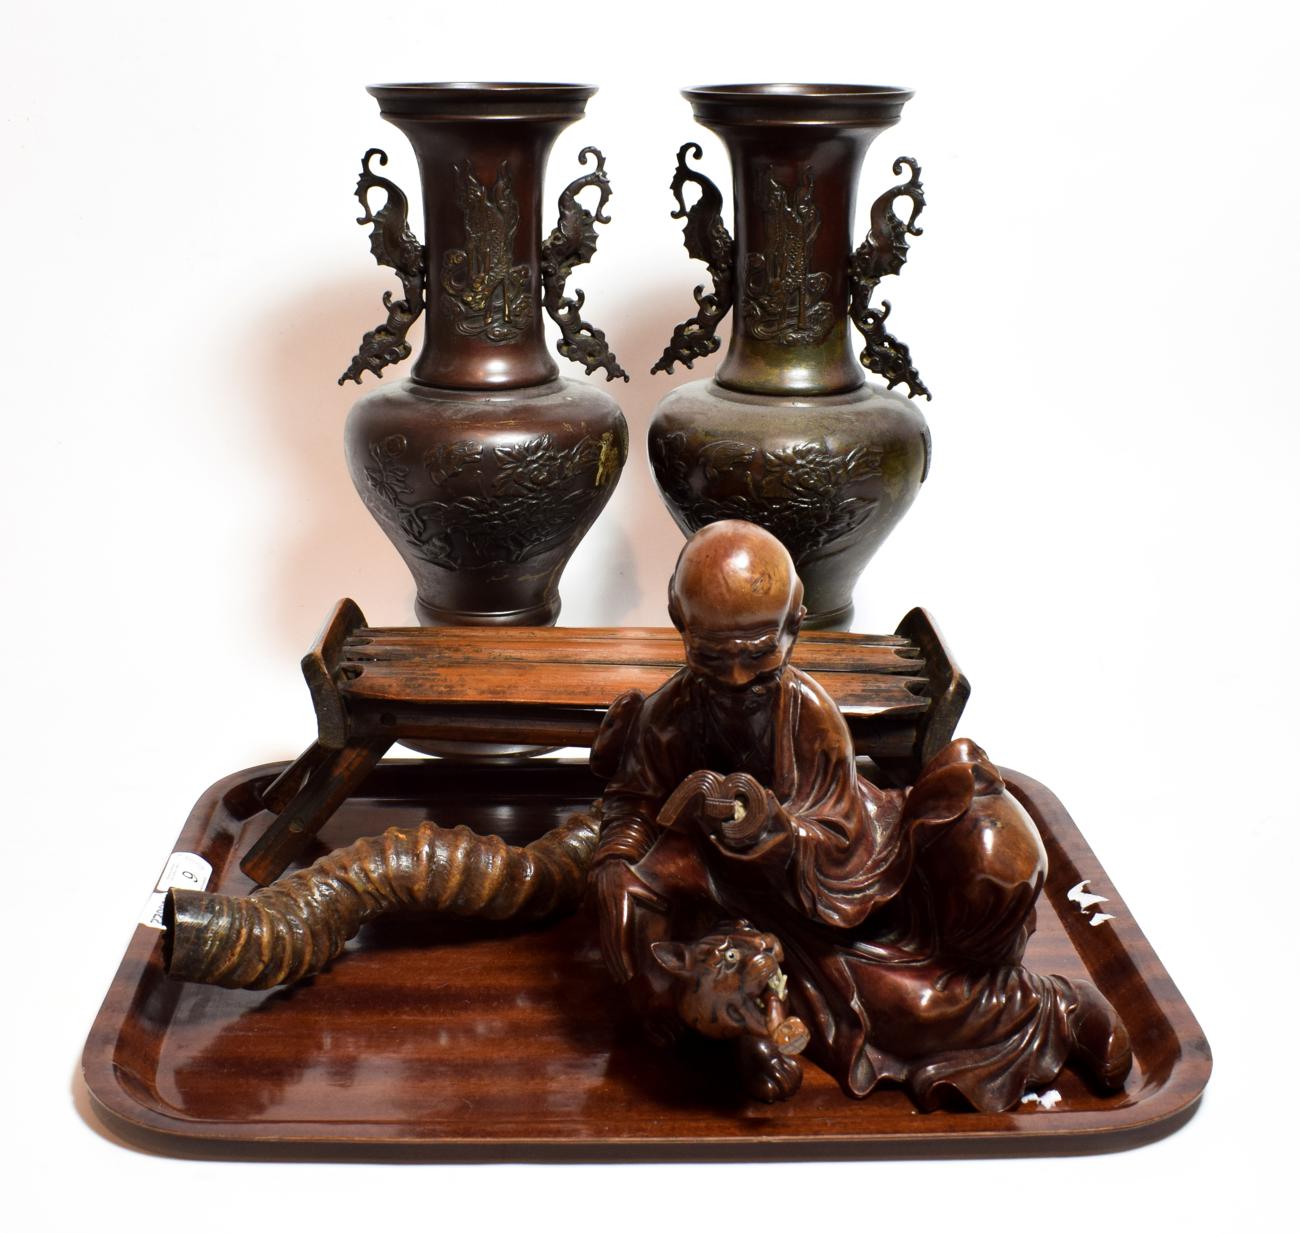 Lot 6 - Japanese items including a pair of bronze vases; a headrest; a rootwood figure; and a horn (5)